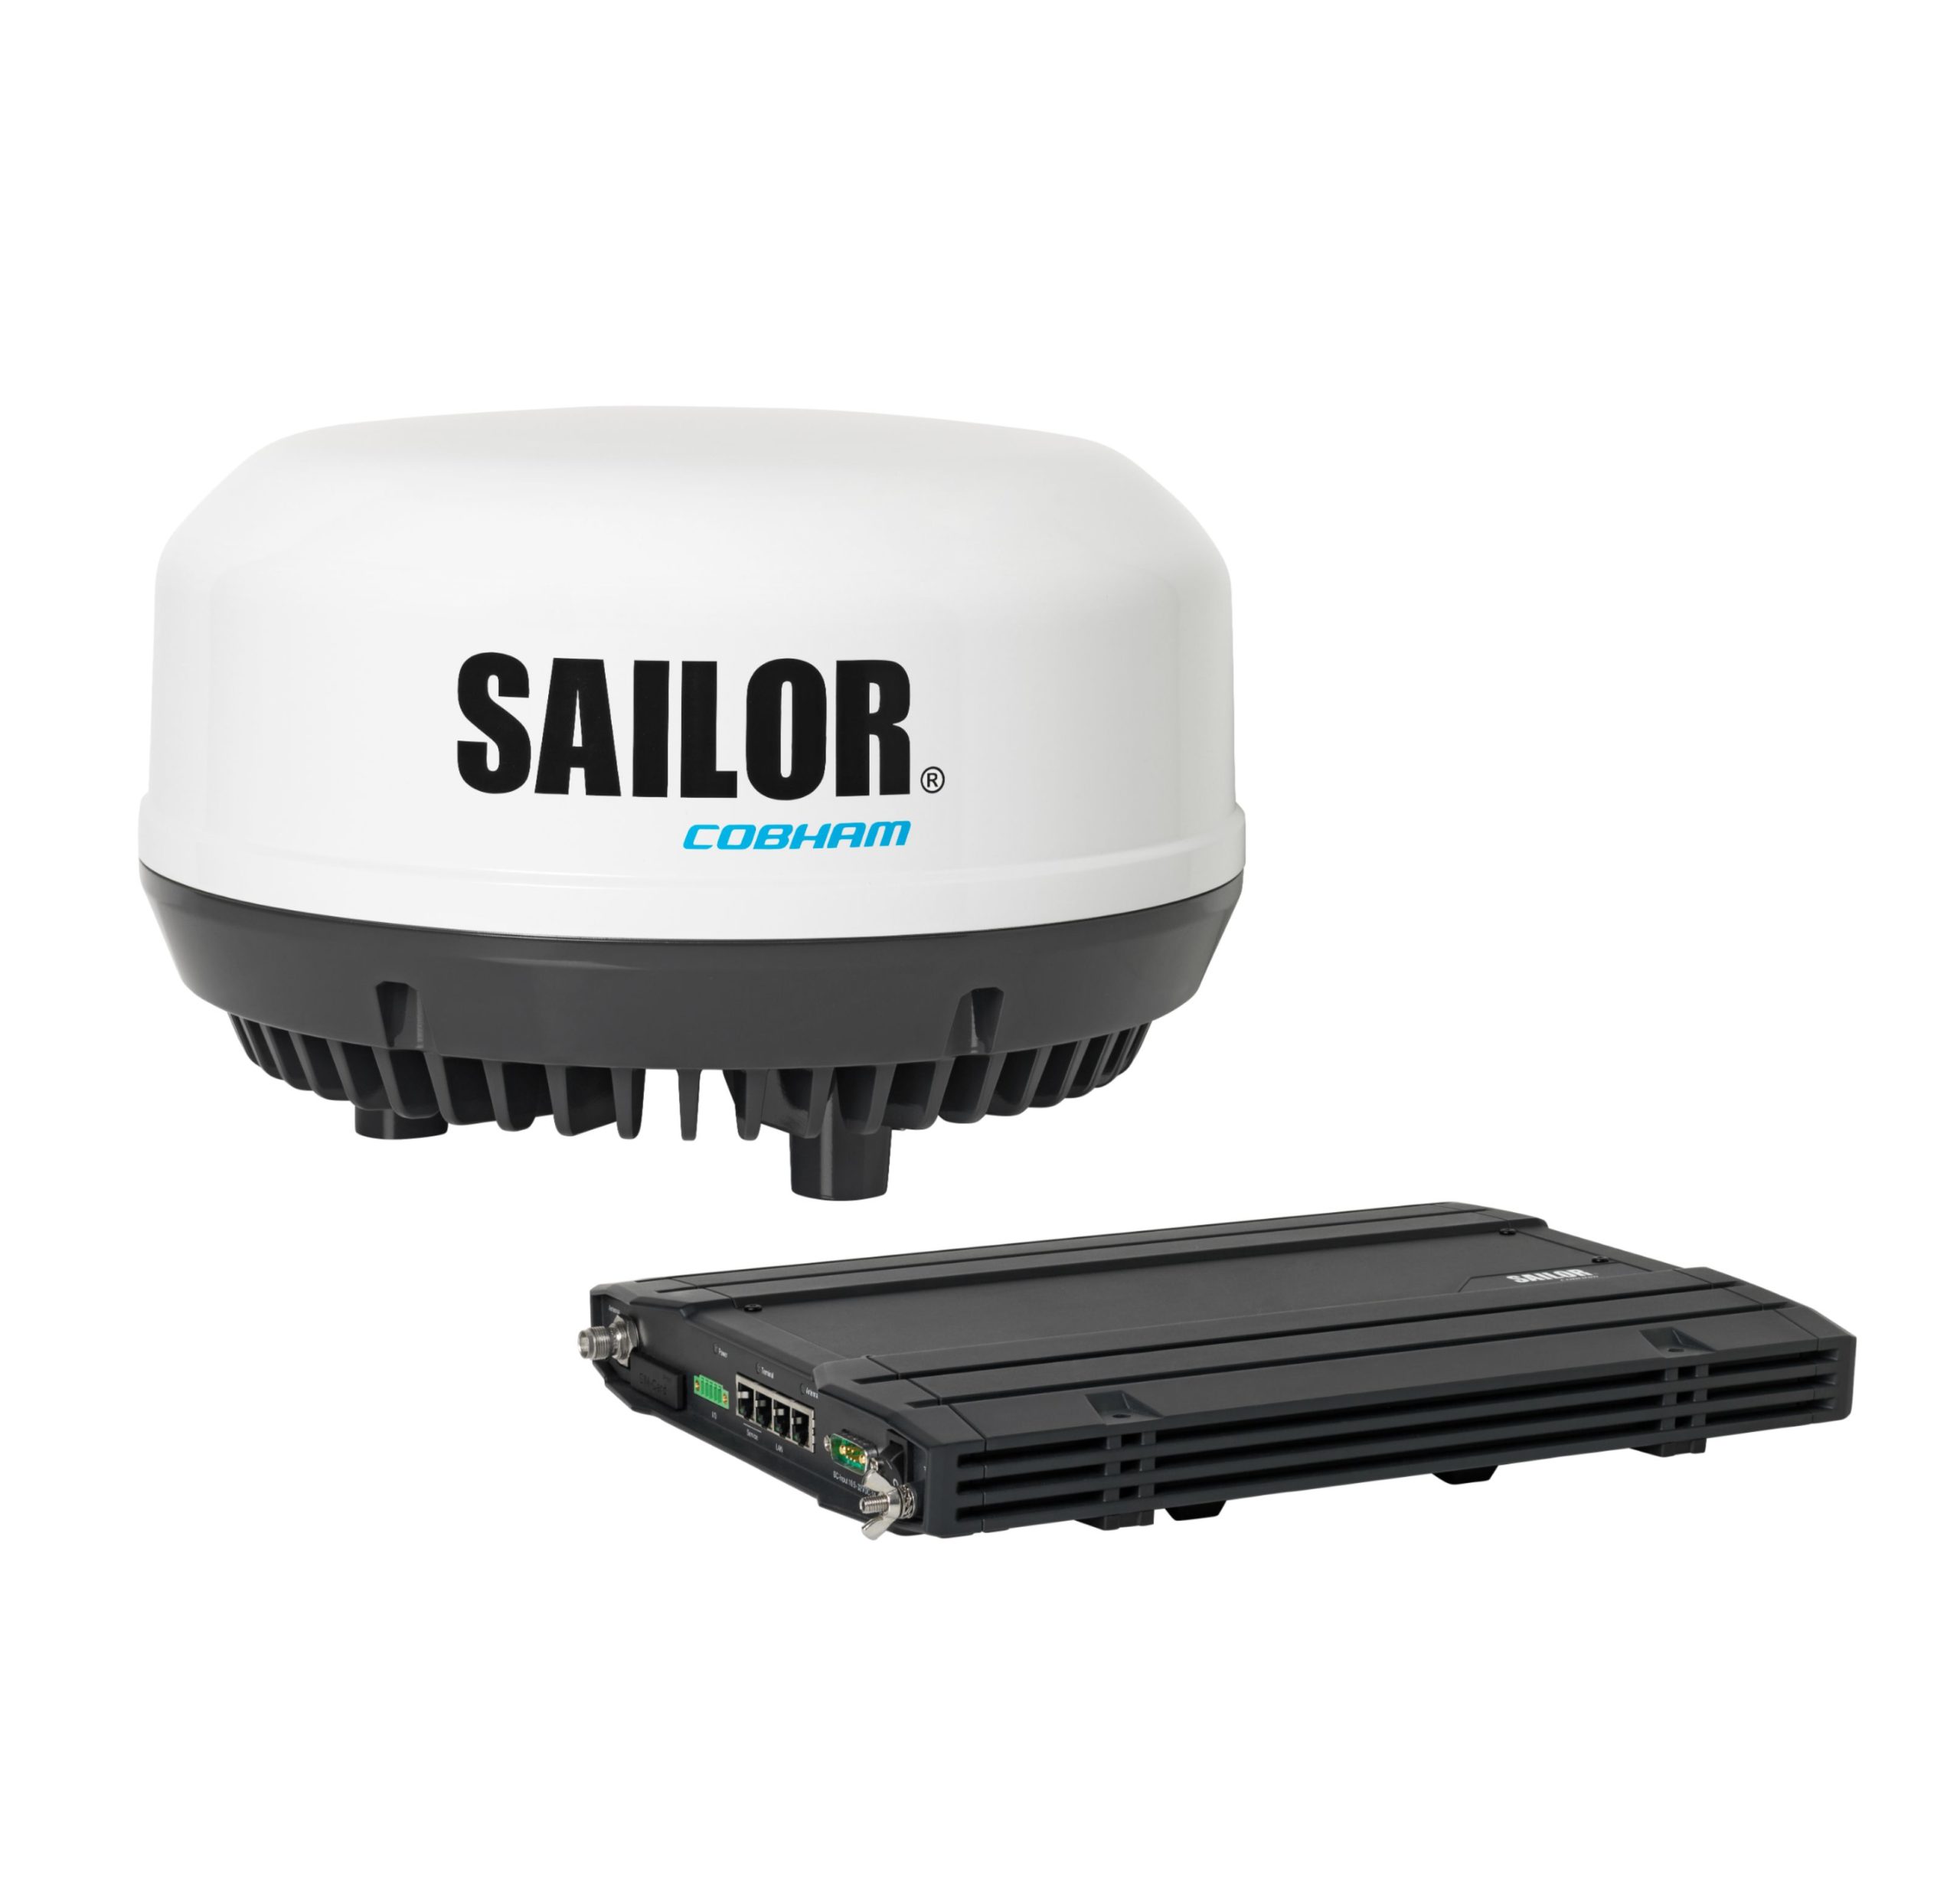 Japan approves use of Cobham SATCOM’s SAILOR 4300 L-band, unlocking high-performing connectivity across its fleet